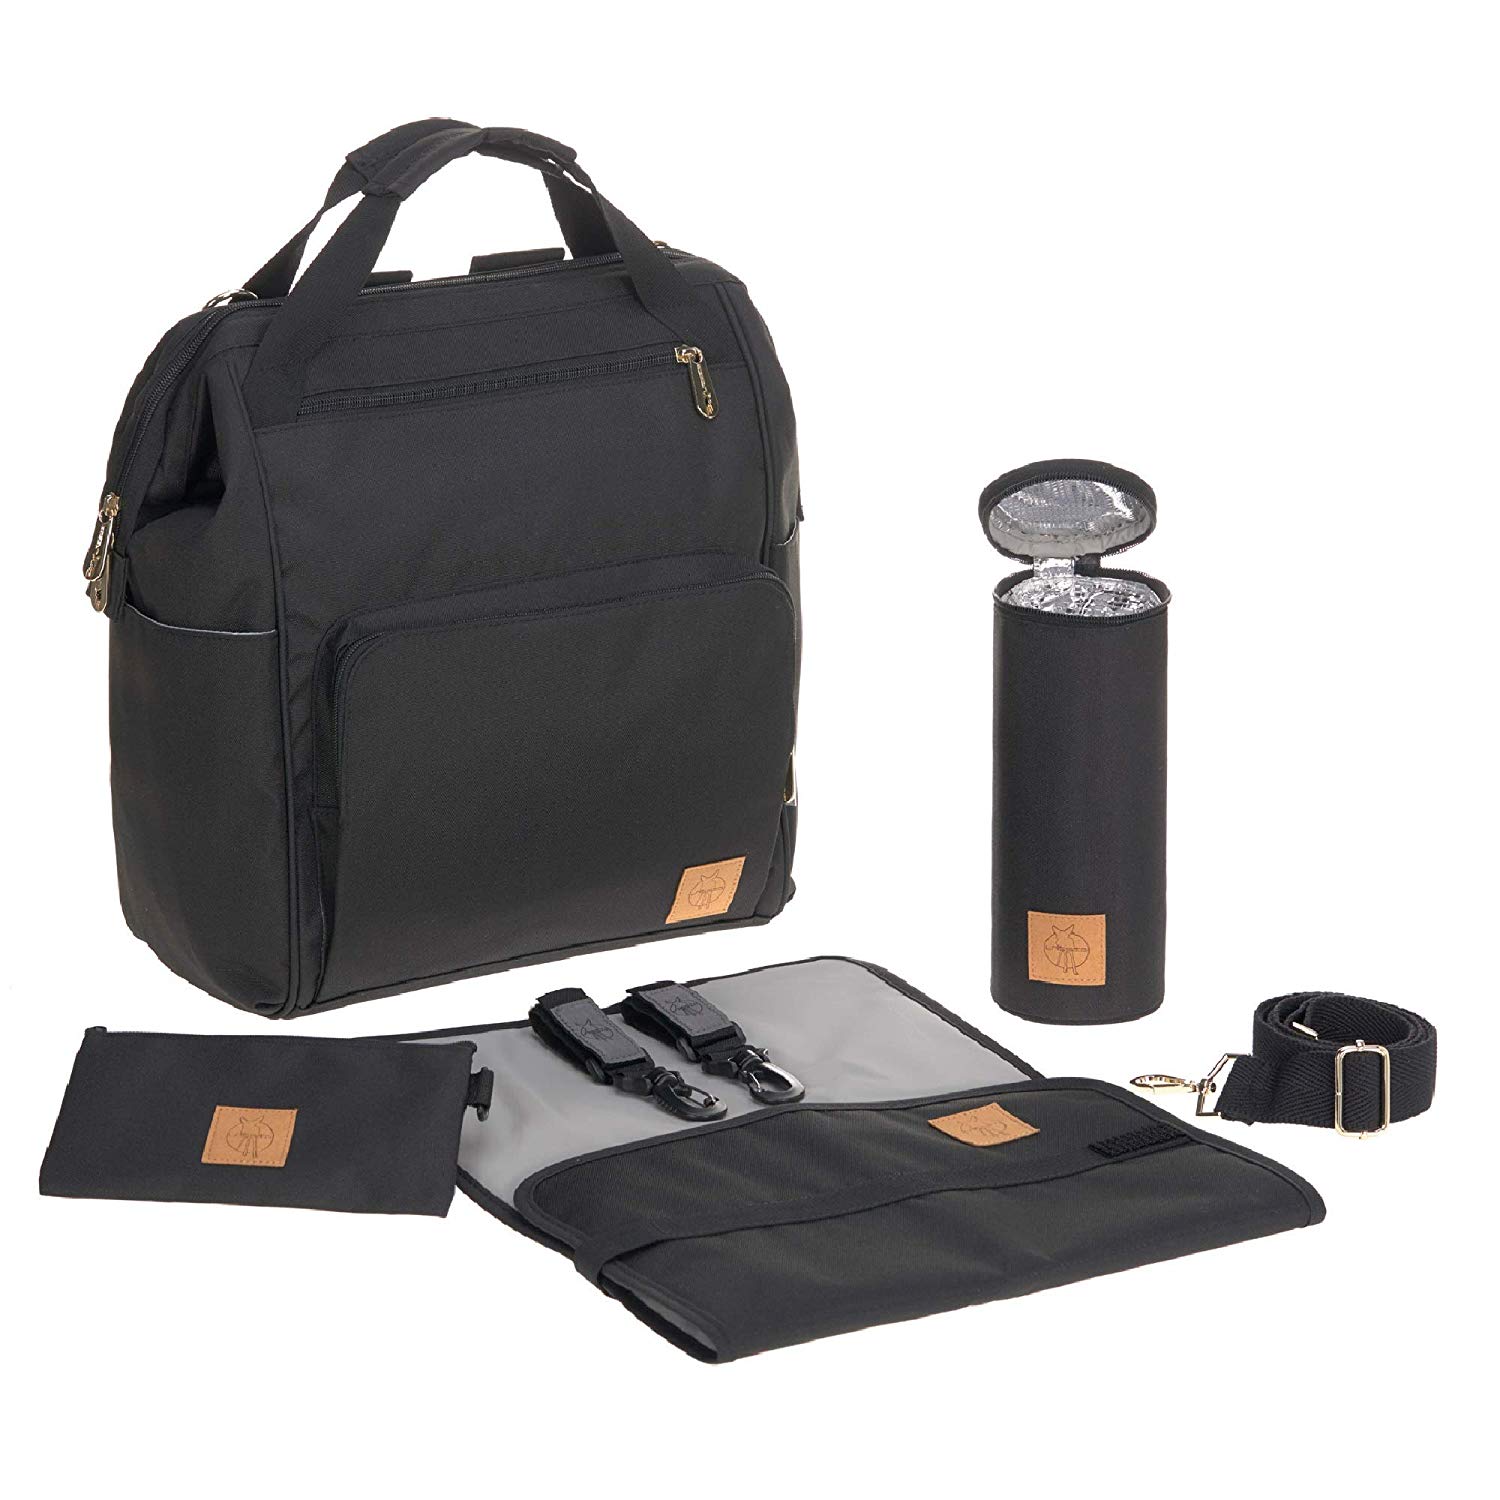 Lässig baby changing backpack, changing bag incl. Changing accessories, sustainably produced / Goldie Backpack Black